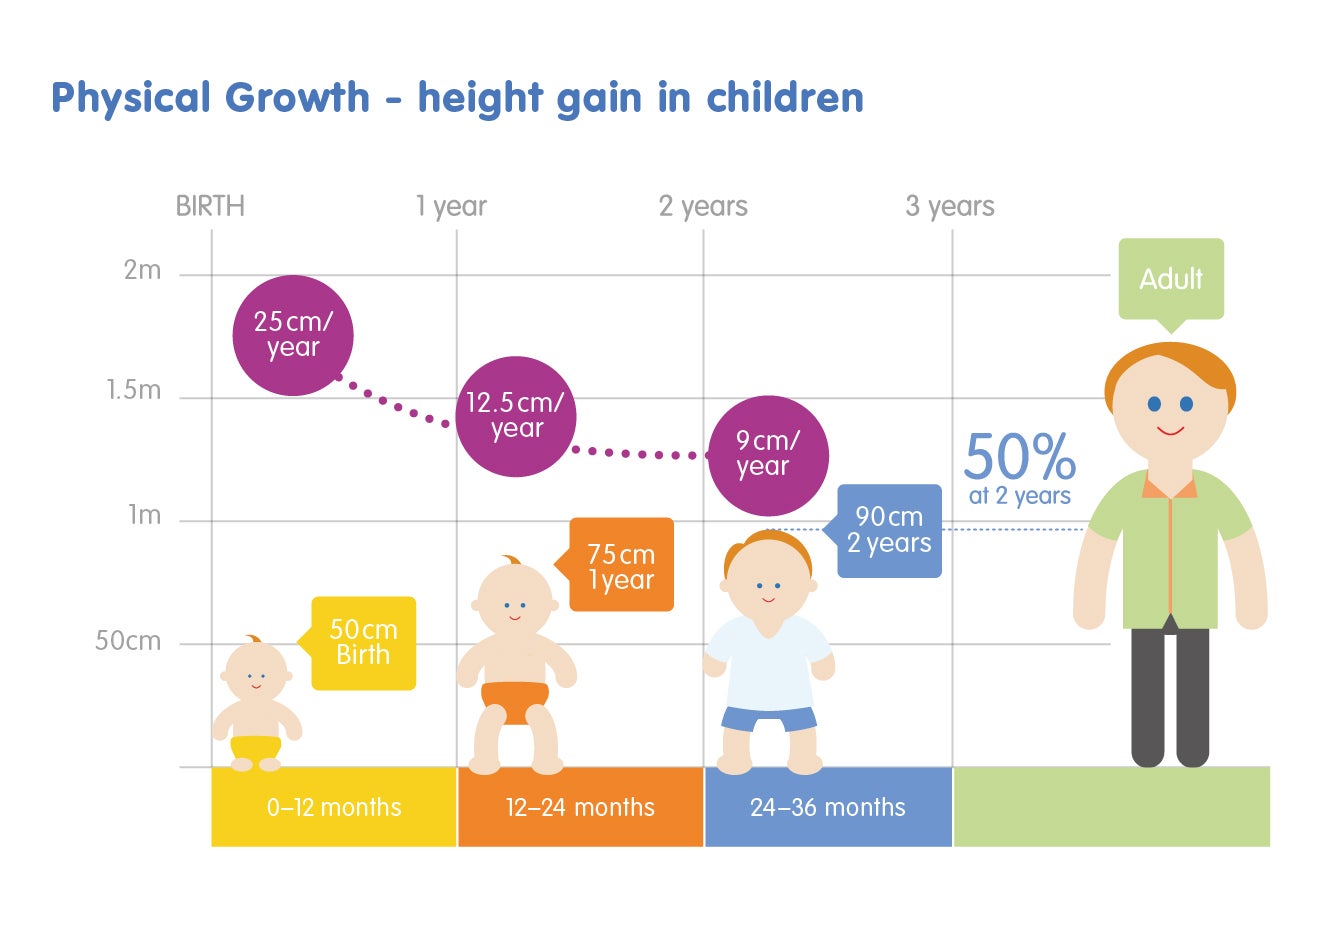 Infographic of children's height growth. In the first year they are expected to gain 25cm. In the second and third year 12.5cm and 9cm, respectively. Between the ages of 2-3 years they will reach 50% of their adult height.